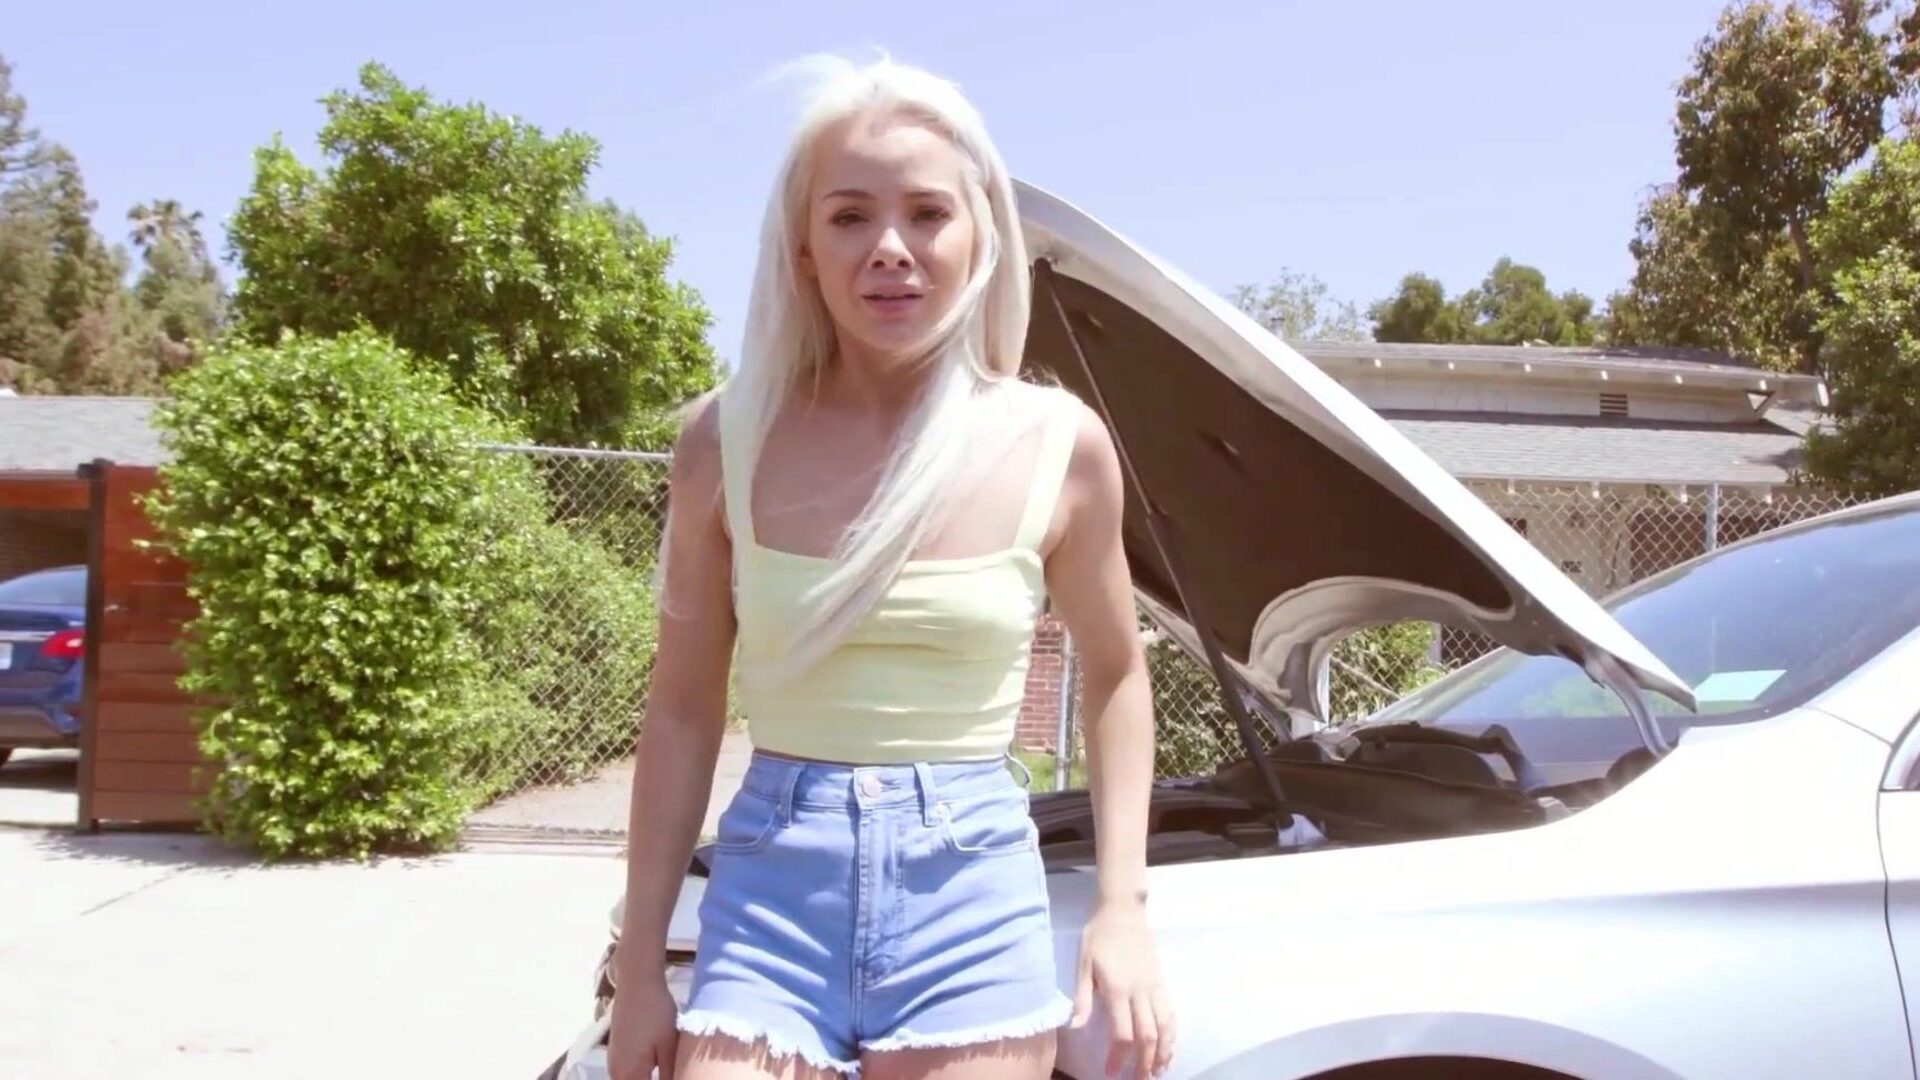 BrokenBabes - Elsa Jean's Car Problems Turn Into Hook Up With BBC Aug 28th 2021